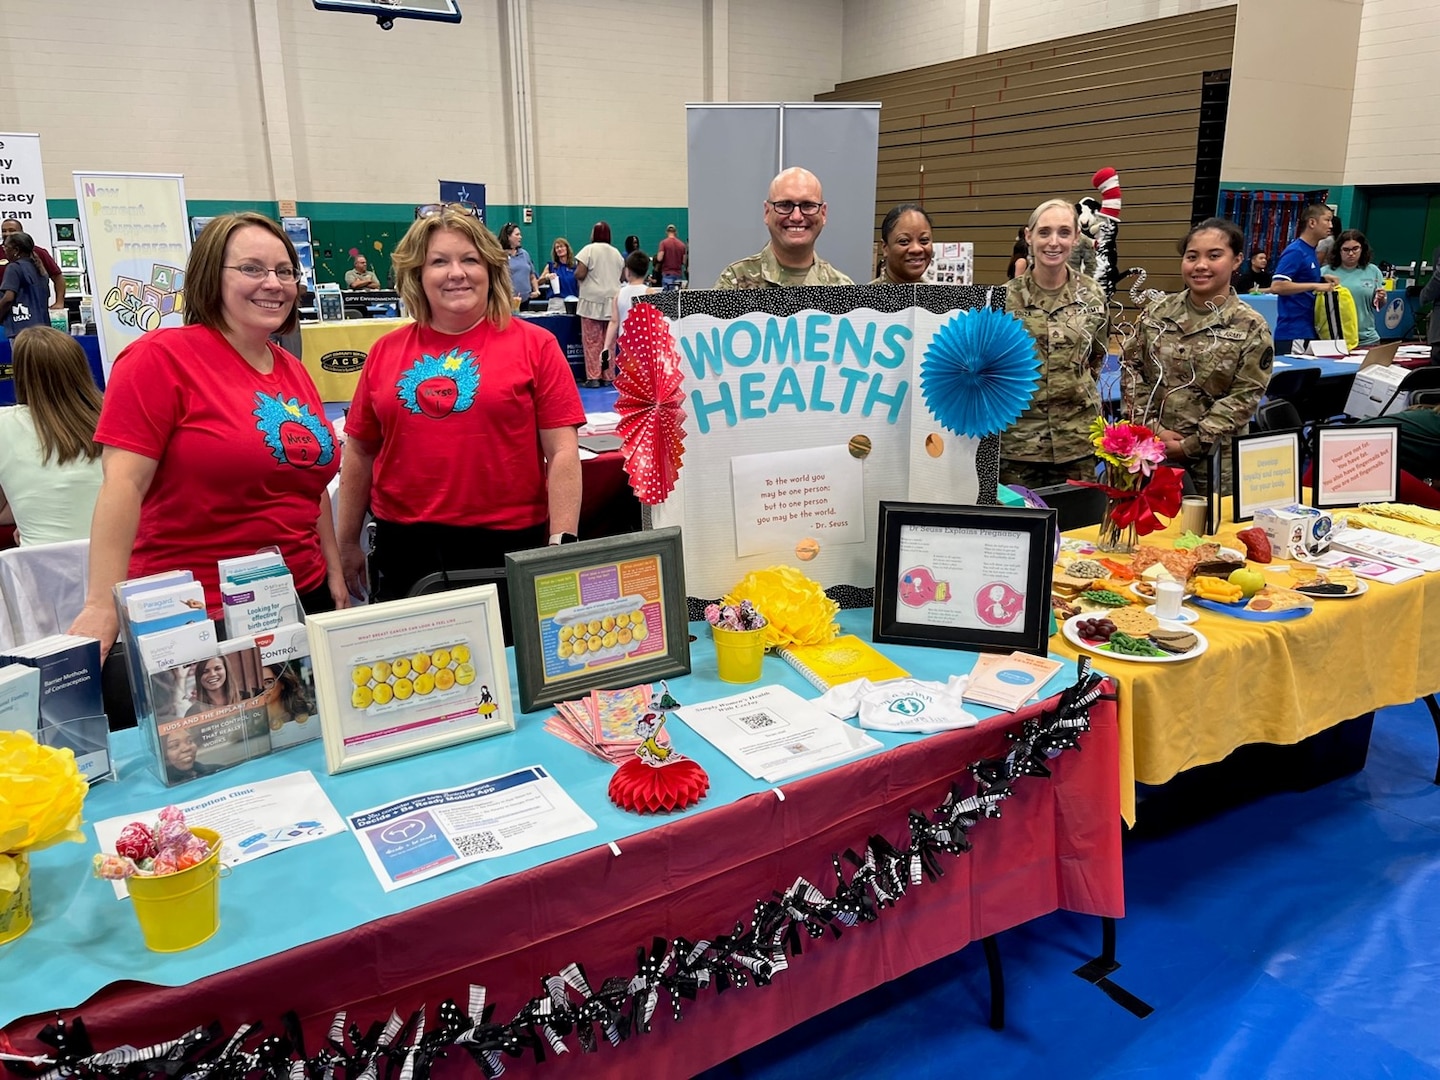 Representatives from Winn Army Community Hospital provided treats and information, July 25 at the Women's Health Display at the Marne Palooza Back to School Fair on Fort Stewart.